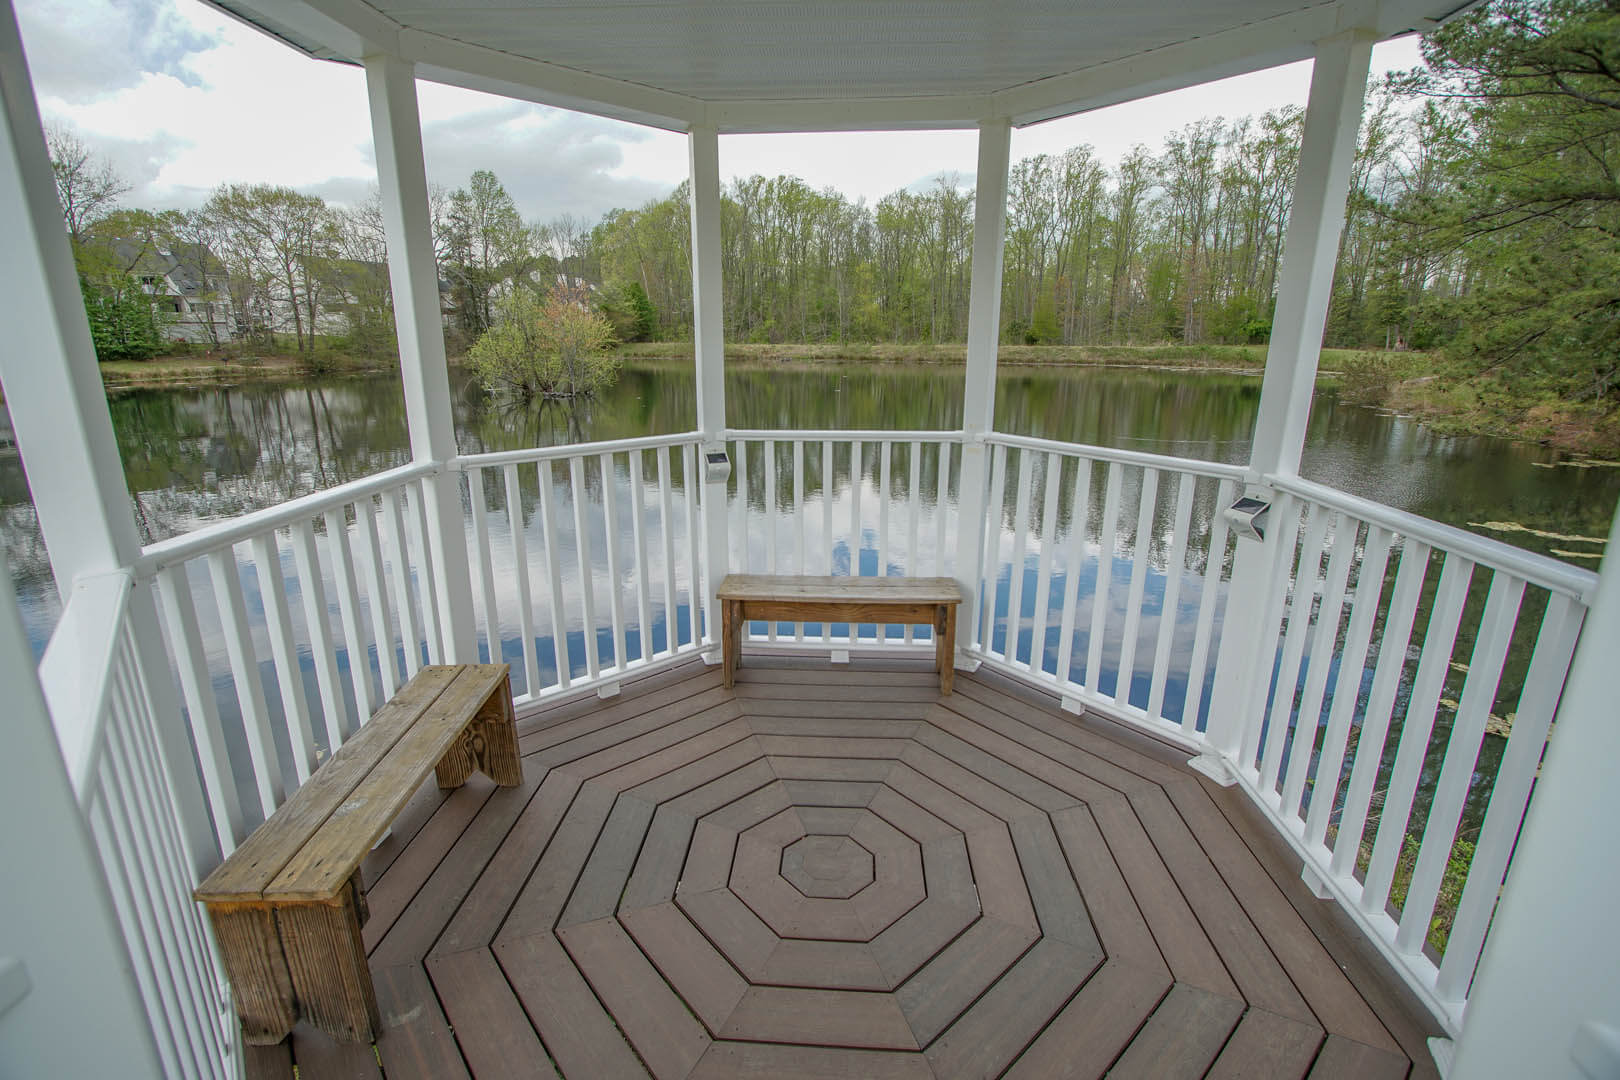 A peaceful view to the lake at VRI's Historic Powhatan in Williamsburg, Virginia.